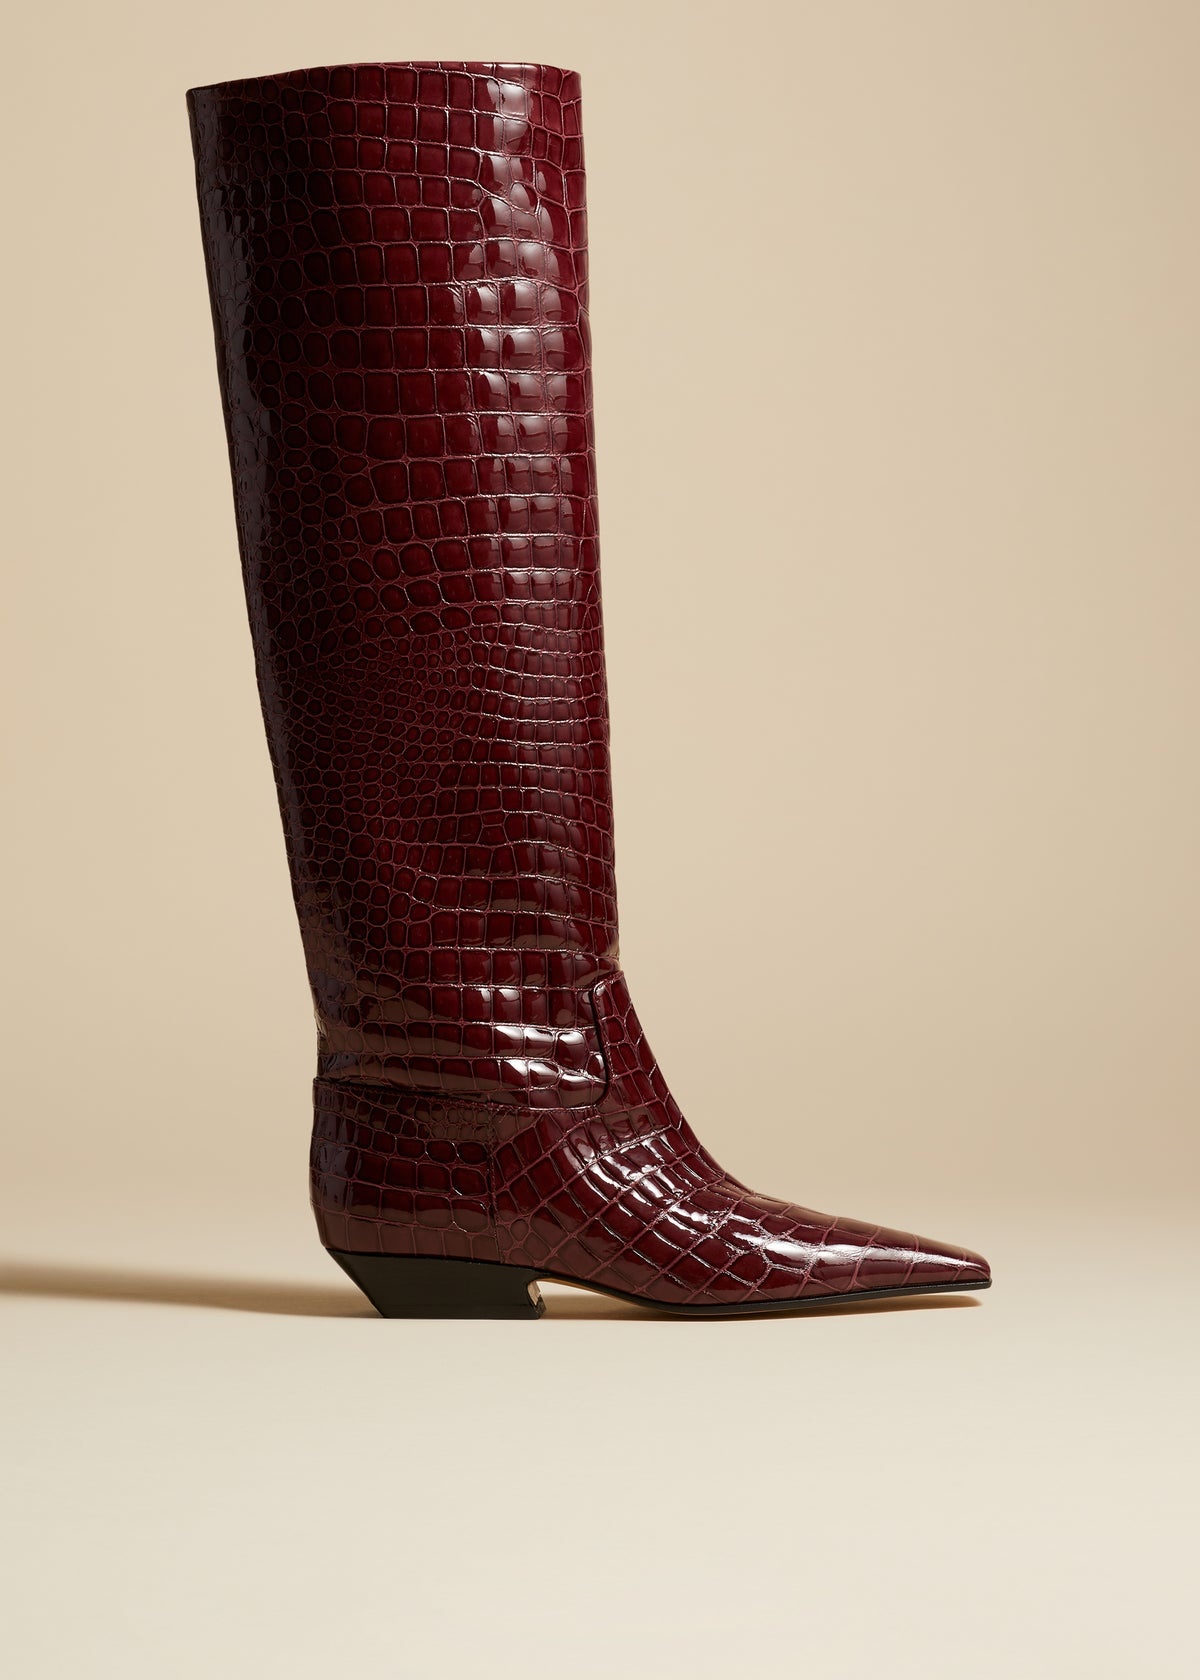 The Marfa Knee-High Boot in Bordeaux Croc-Embossed Leather - 1